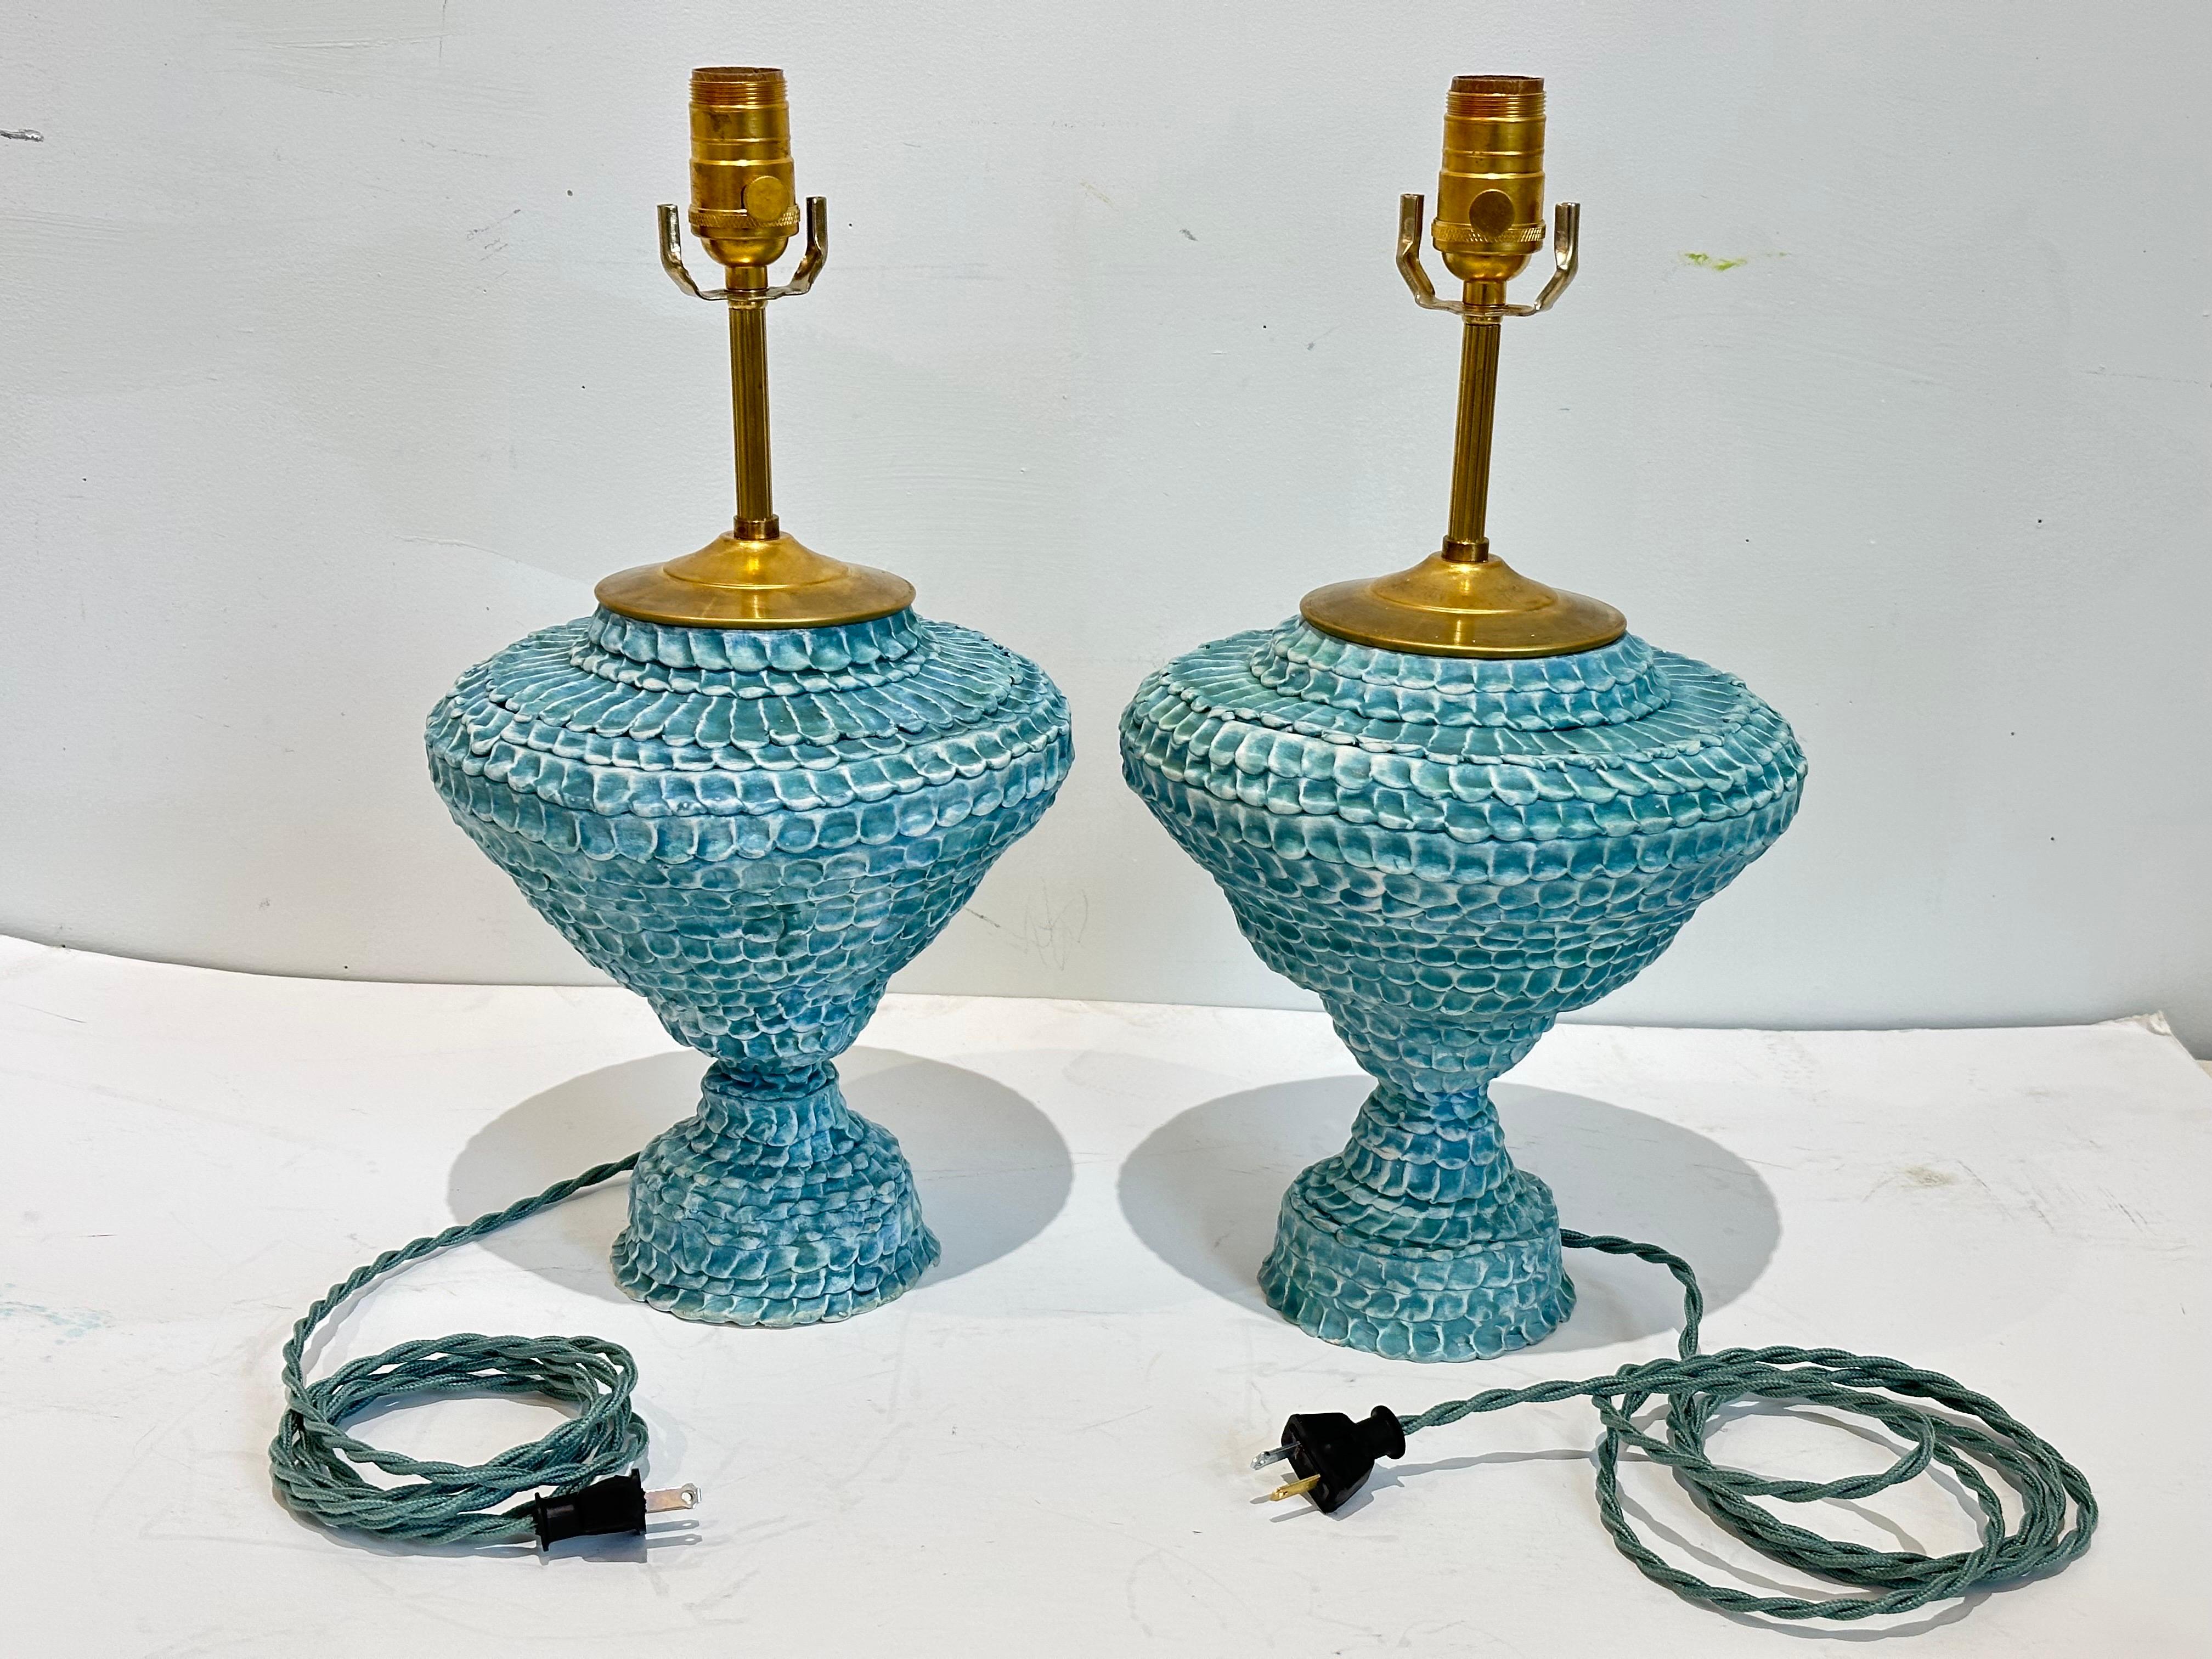 Hand built ceramic urn form lamps in turquoise. Textured surface with variable turquoise to turquoise-green in a matte waxed finish.  All hardware is live brass.  
Ceramic body is 10